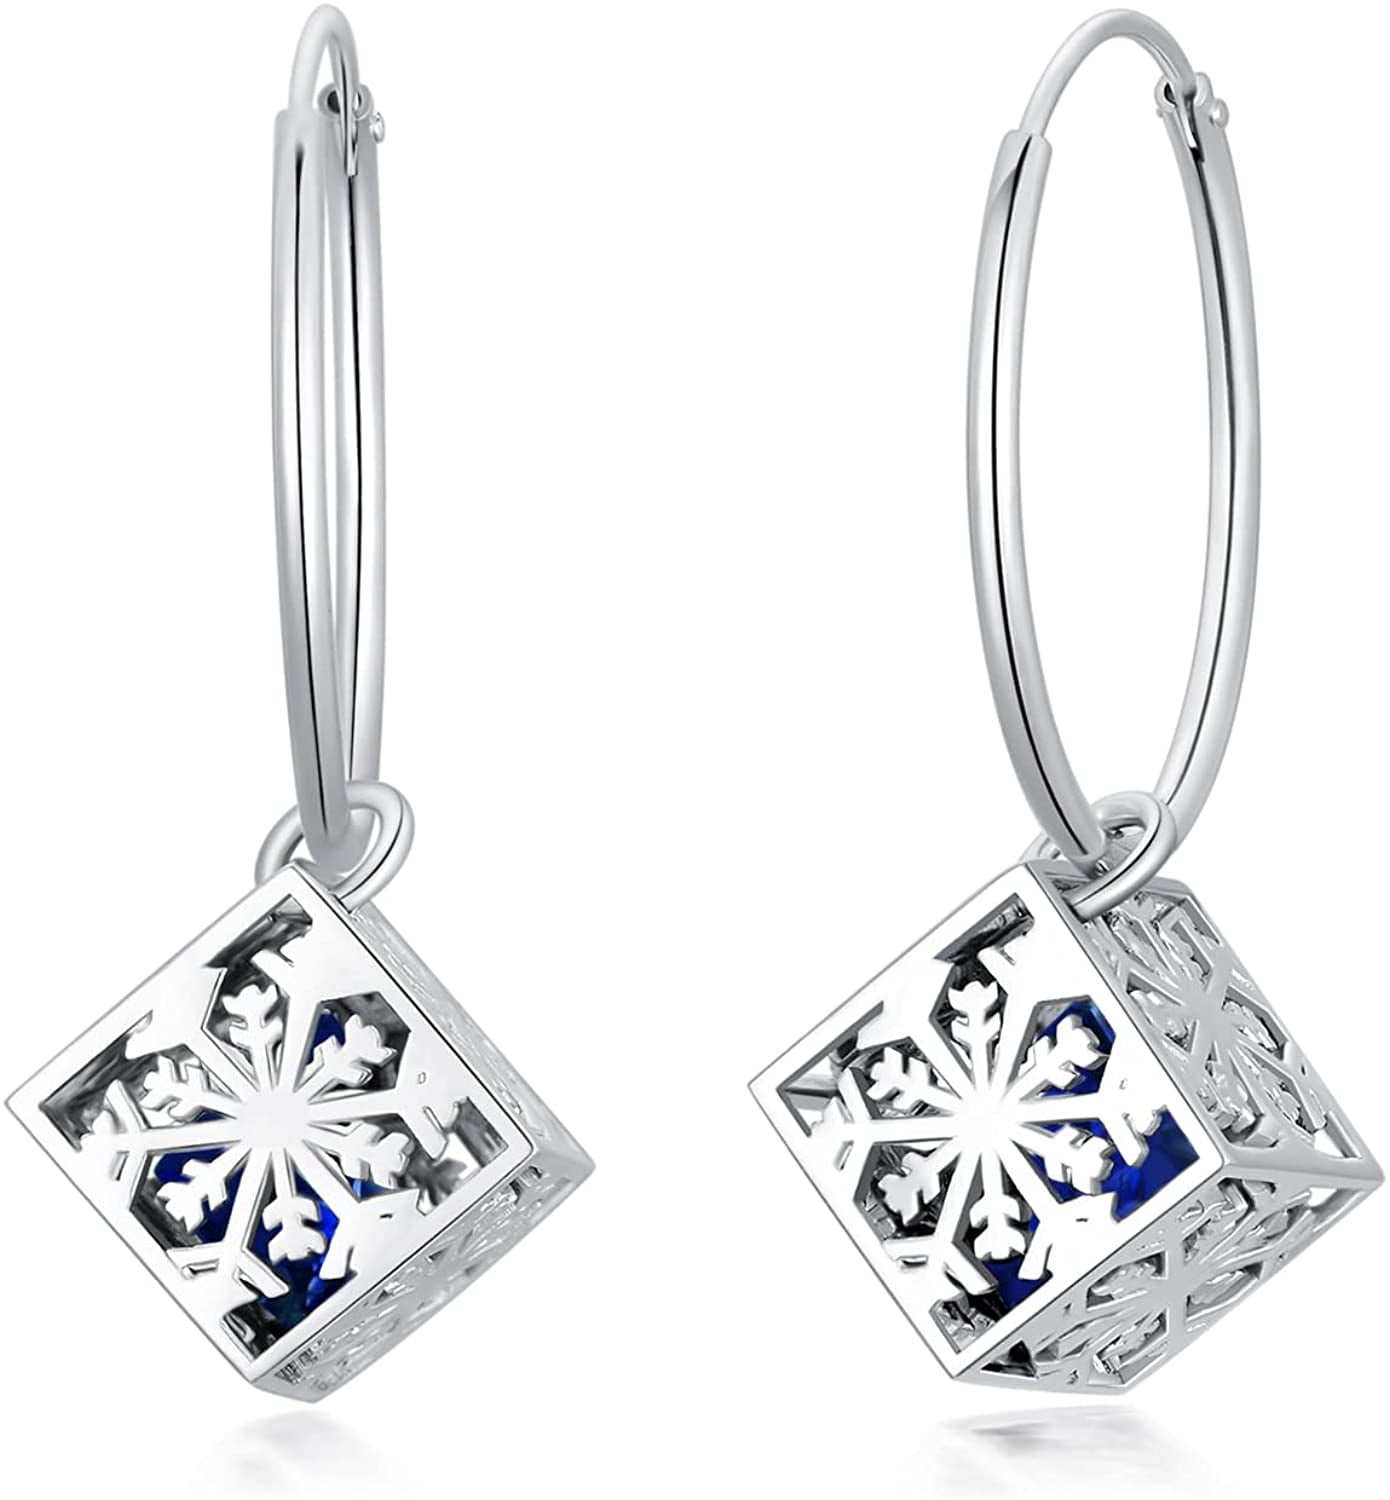 Details about   925 PURE Silver Triangle Earrings Made In India Affordable Wedding Jewelry 